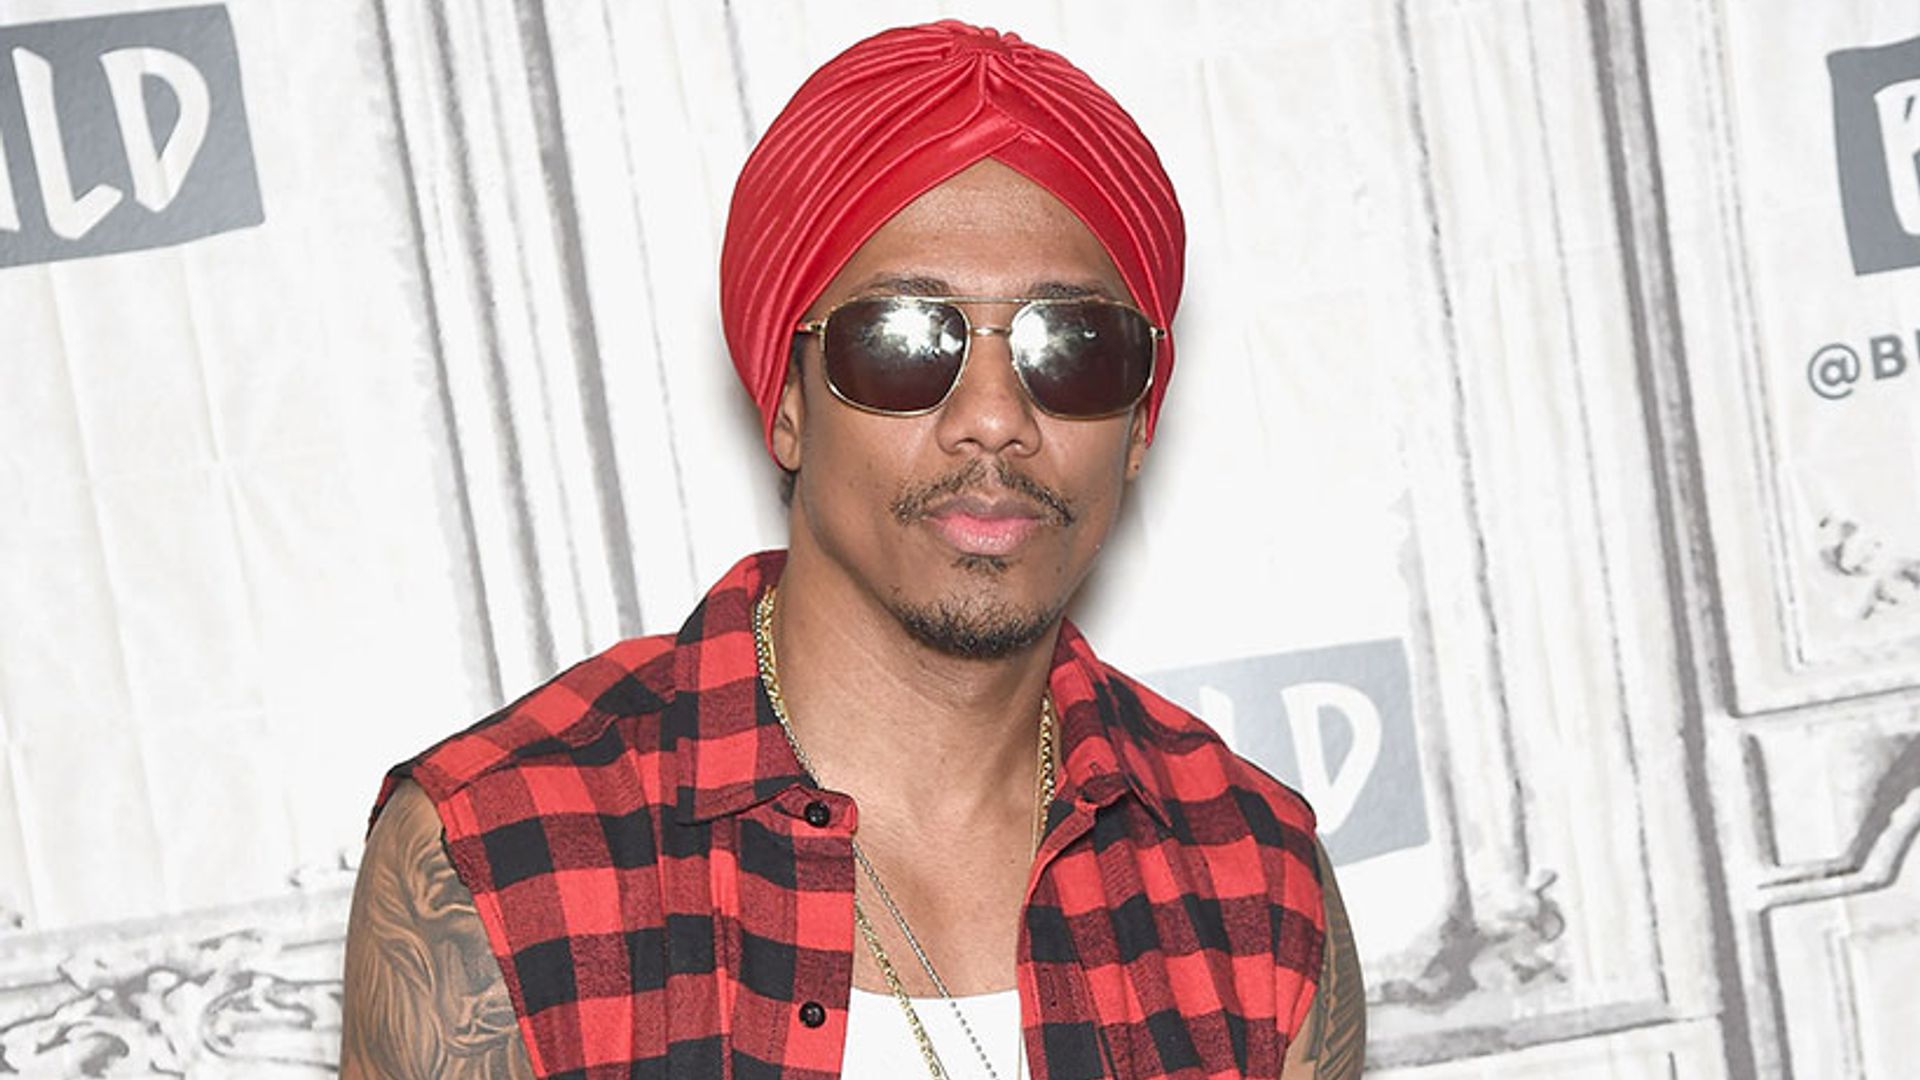 Mariah Carey's ex-husband Nick Cannon welcomes third child - find out the unusual name